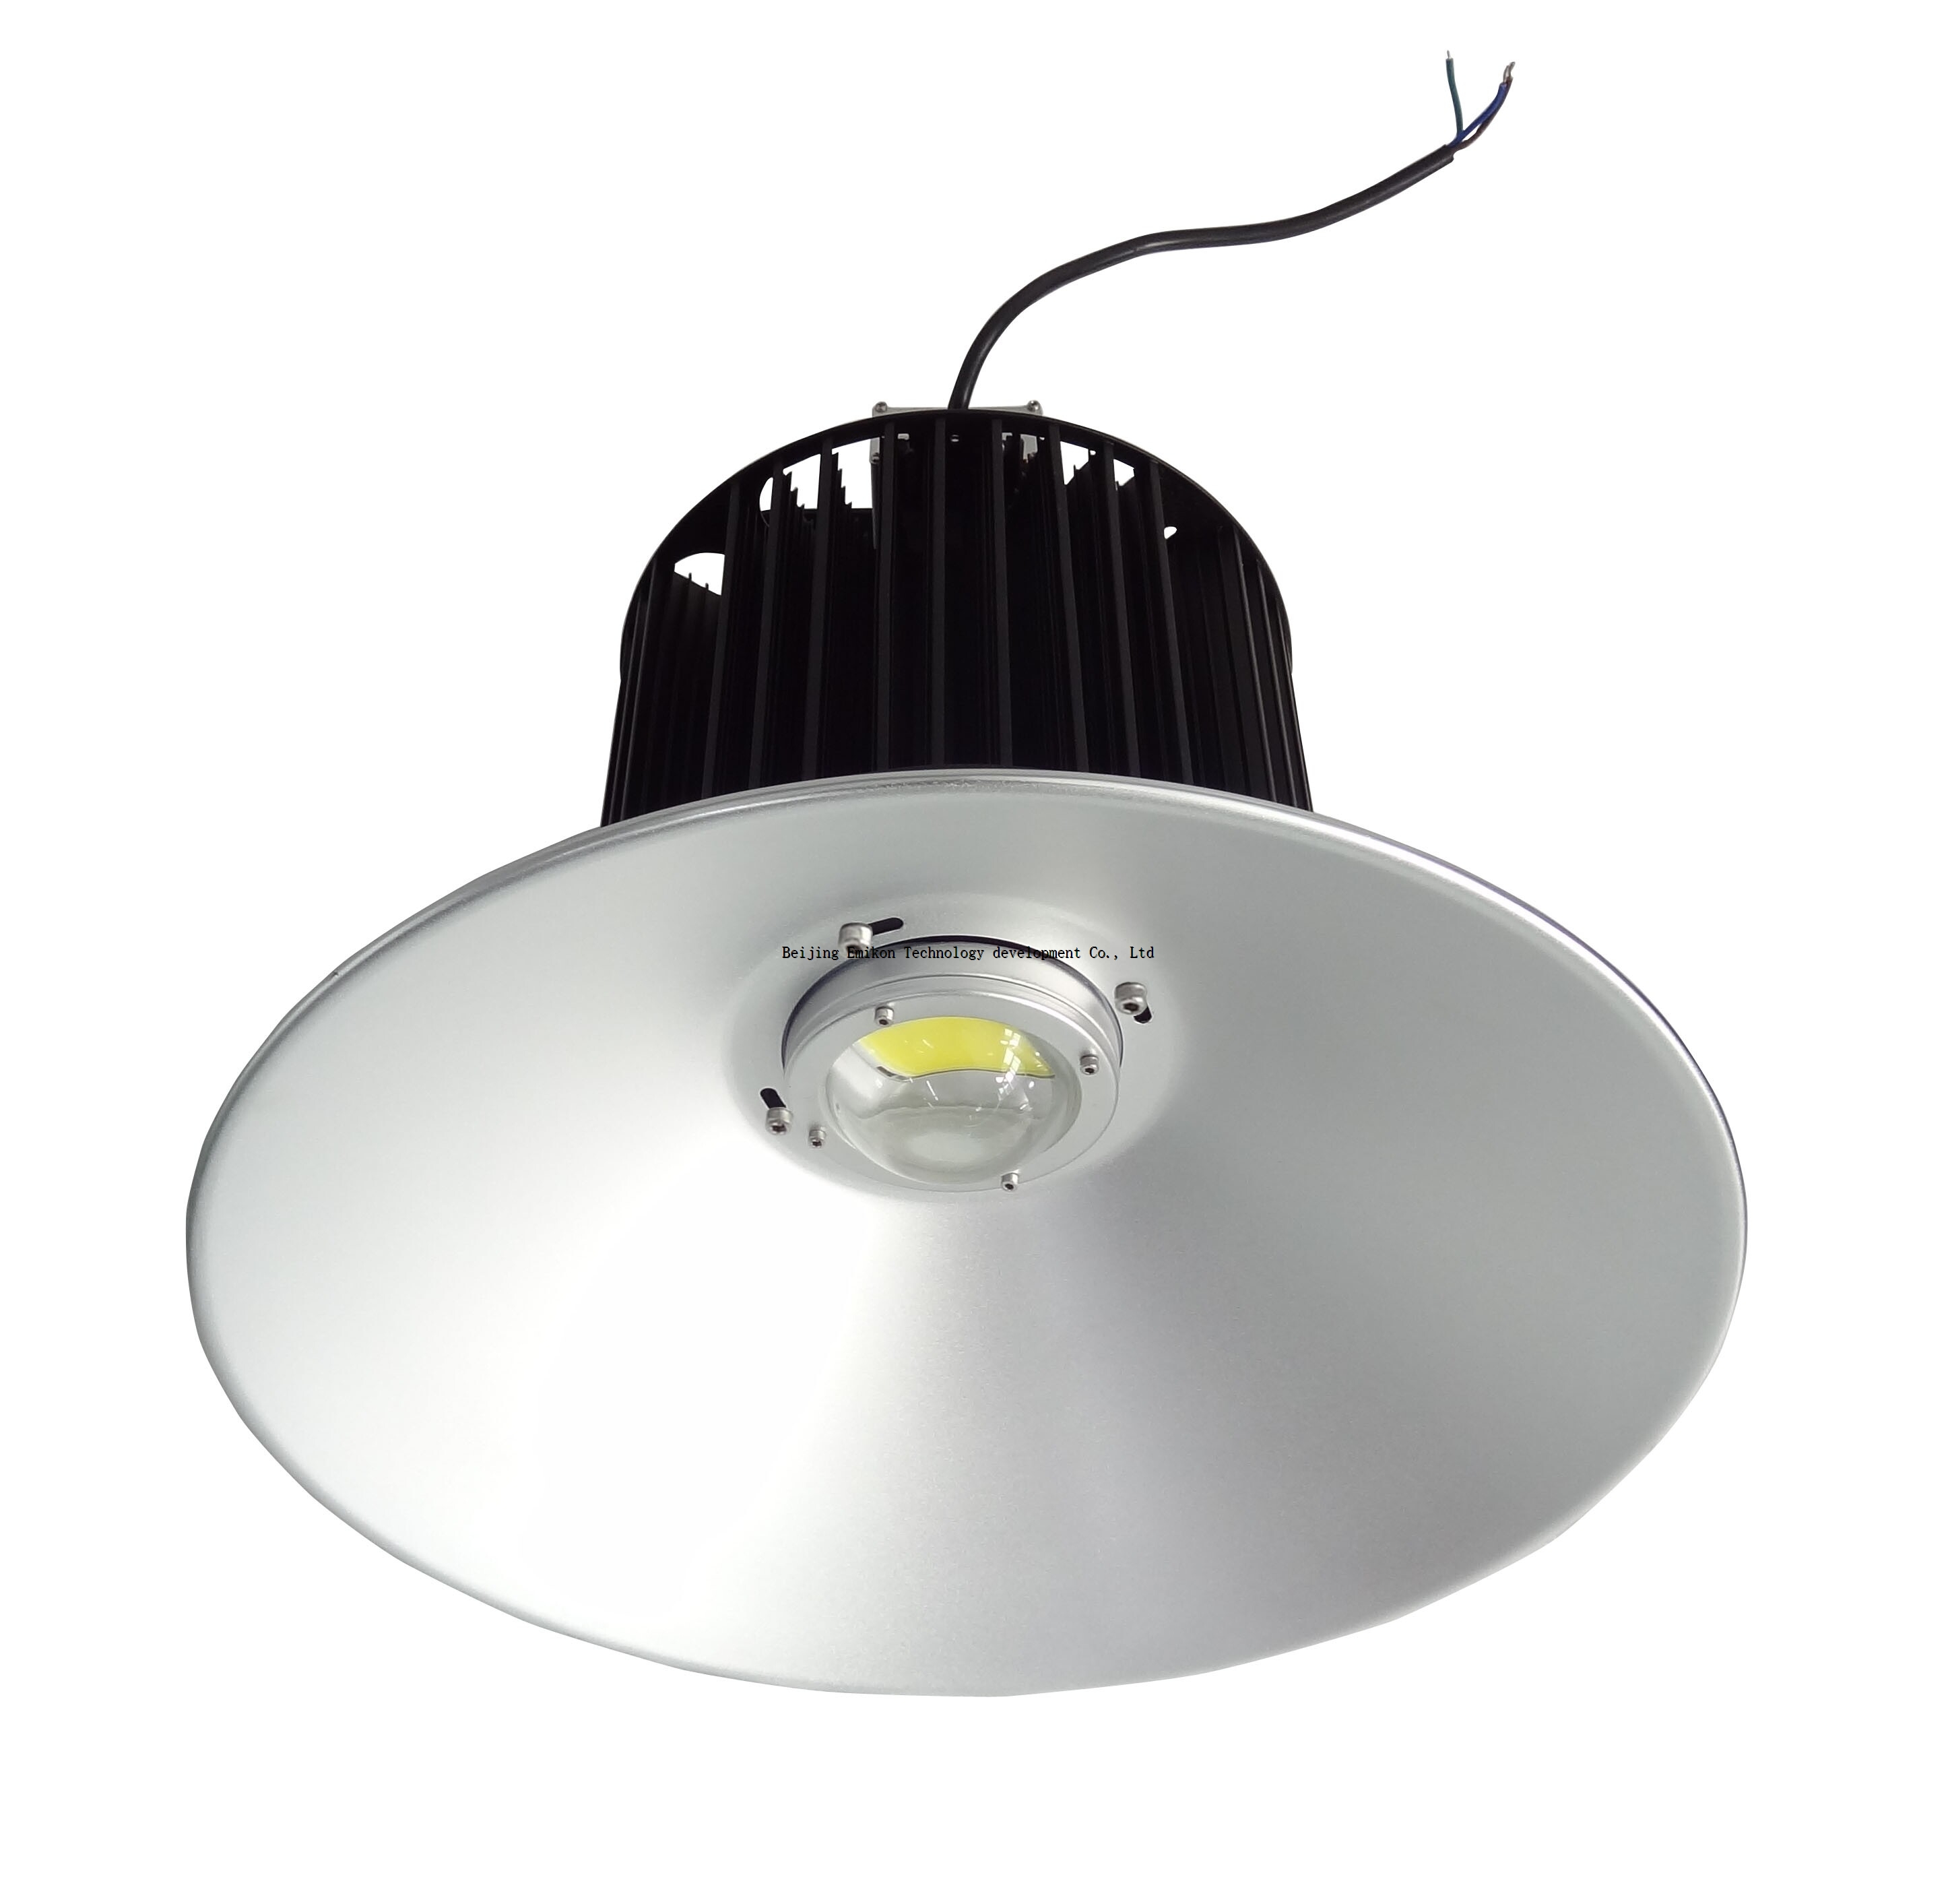 LED high bay light with 5 years warranty